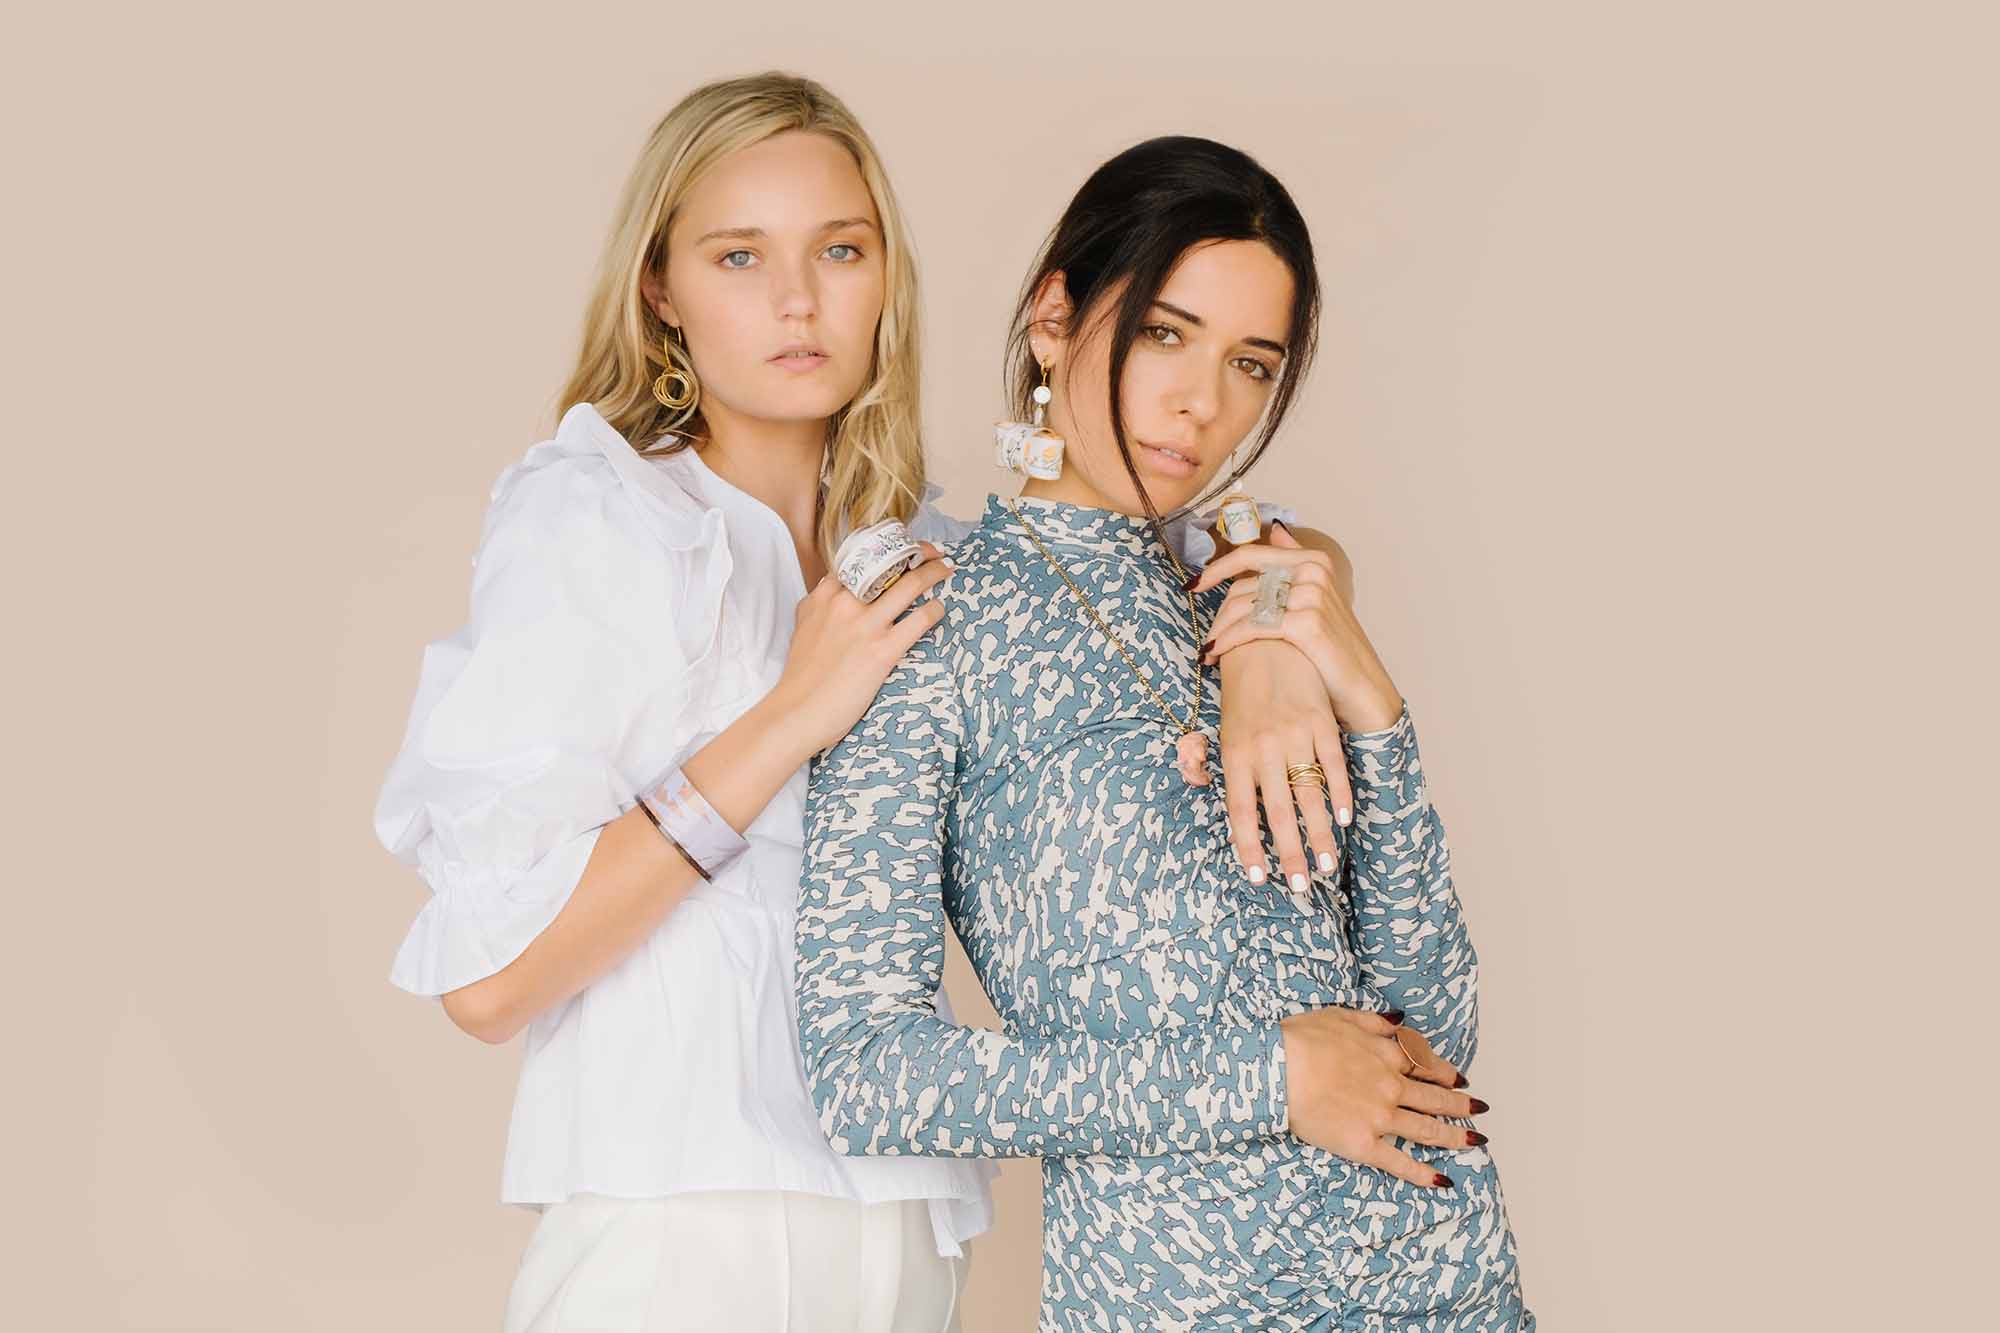 Two models showcasing contemporary fashion styles against a neutral backdrop, adorned with statement jewelry.